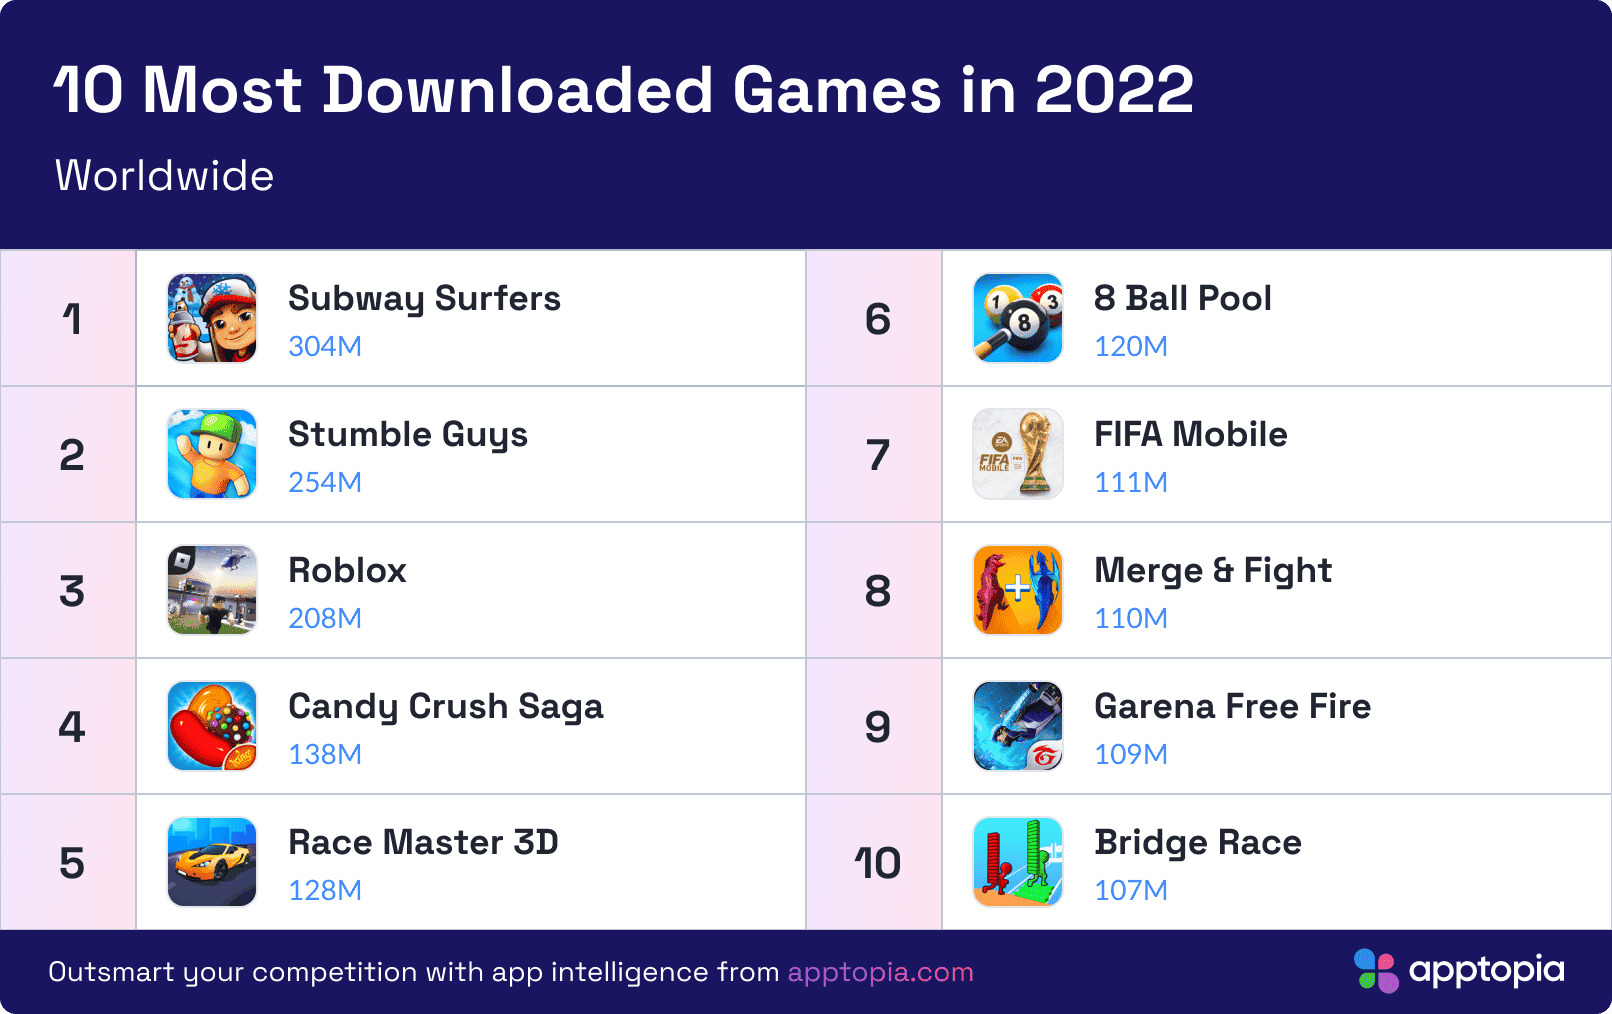 The best mobile games of 2022: 6 must-download titles